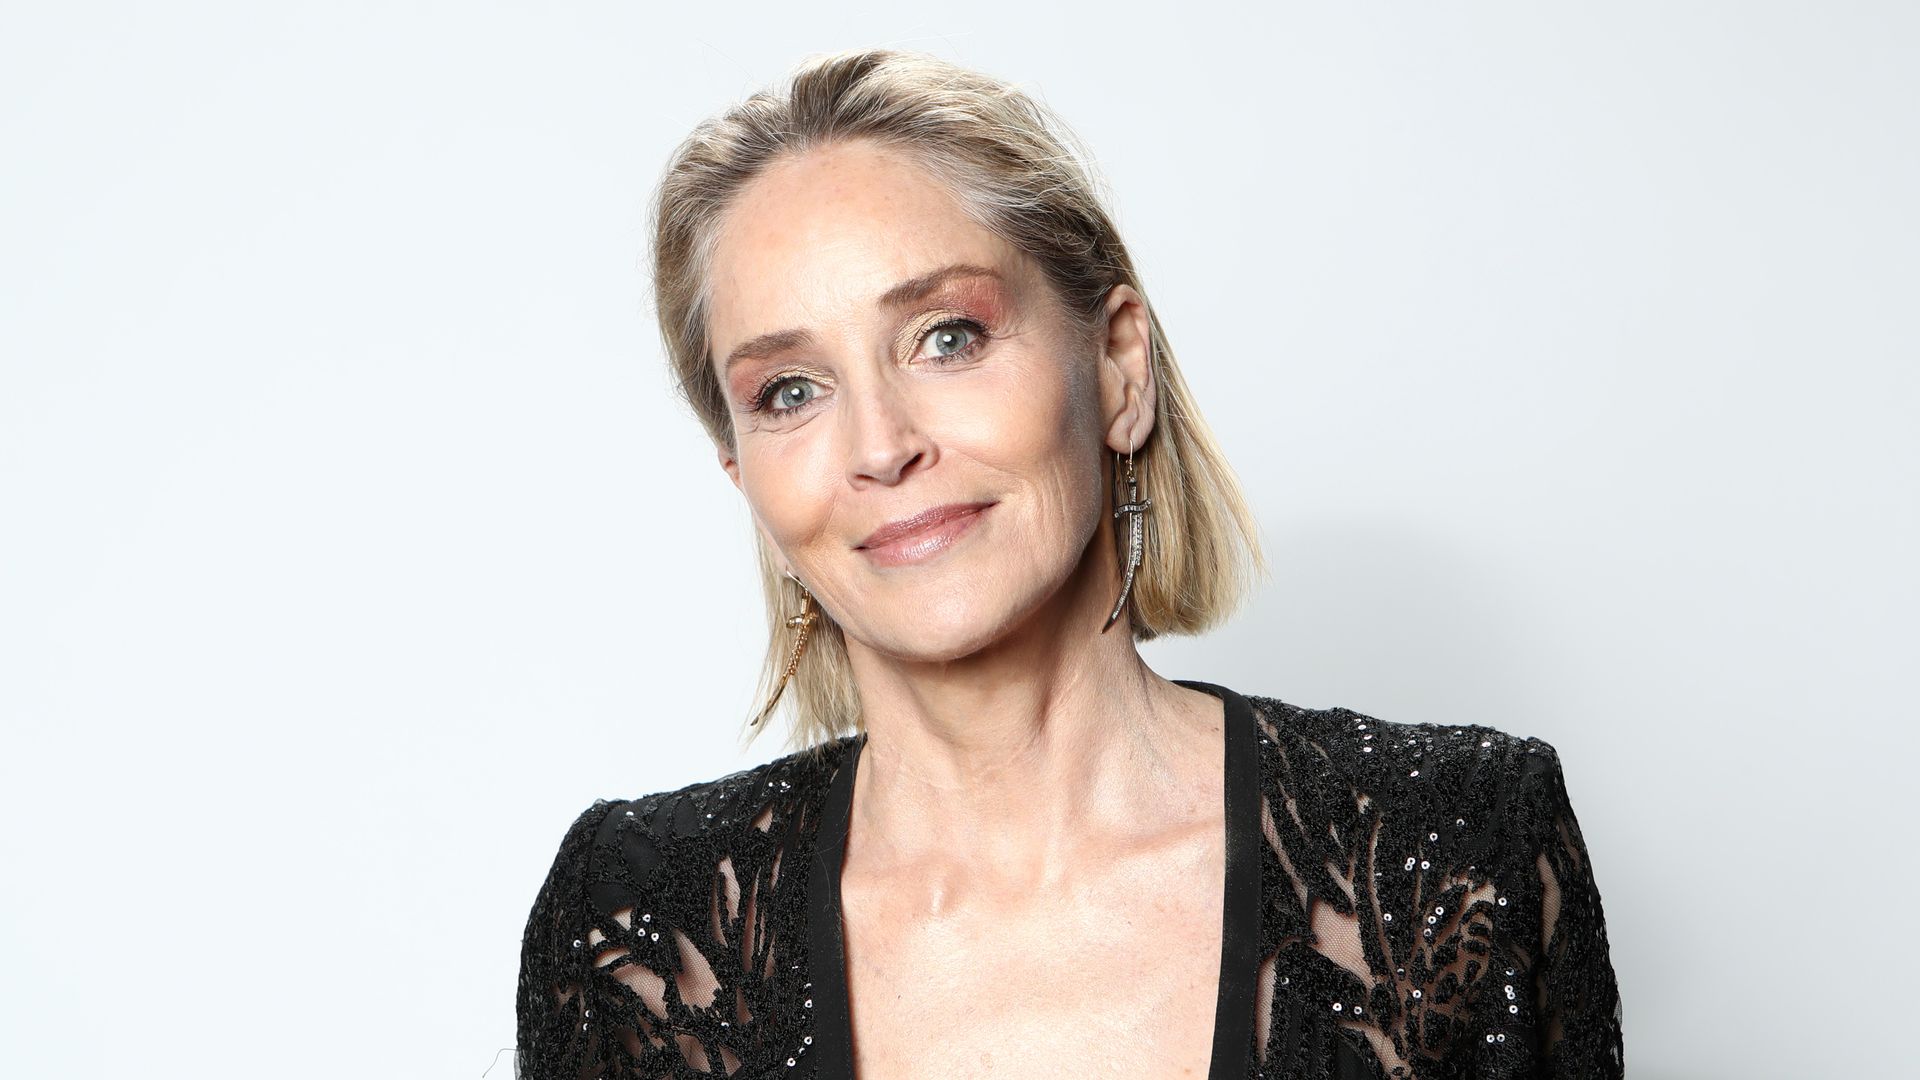 Sharon Stone attends IMDb LIVE Presented By M&M'S At The Elton John AIDS Foundation Academy Awards Viewing Party on February 09, 2020 in Los Angeles, California